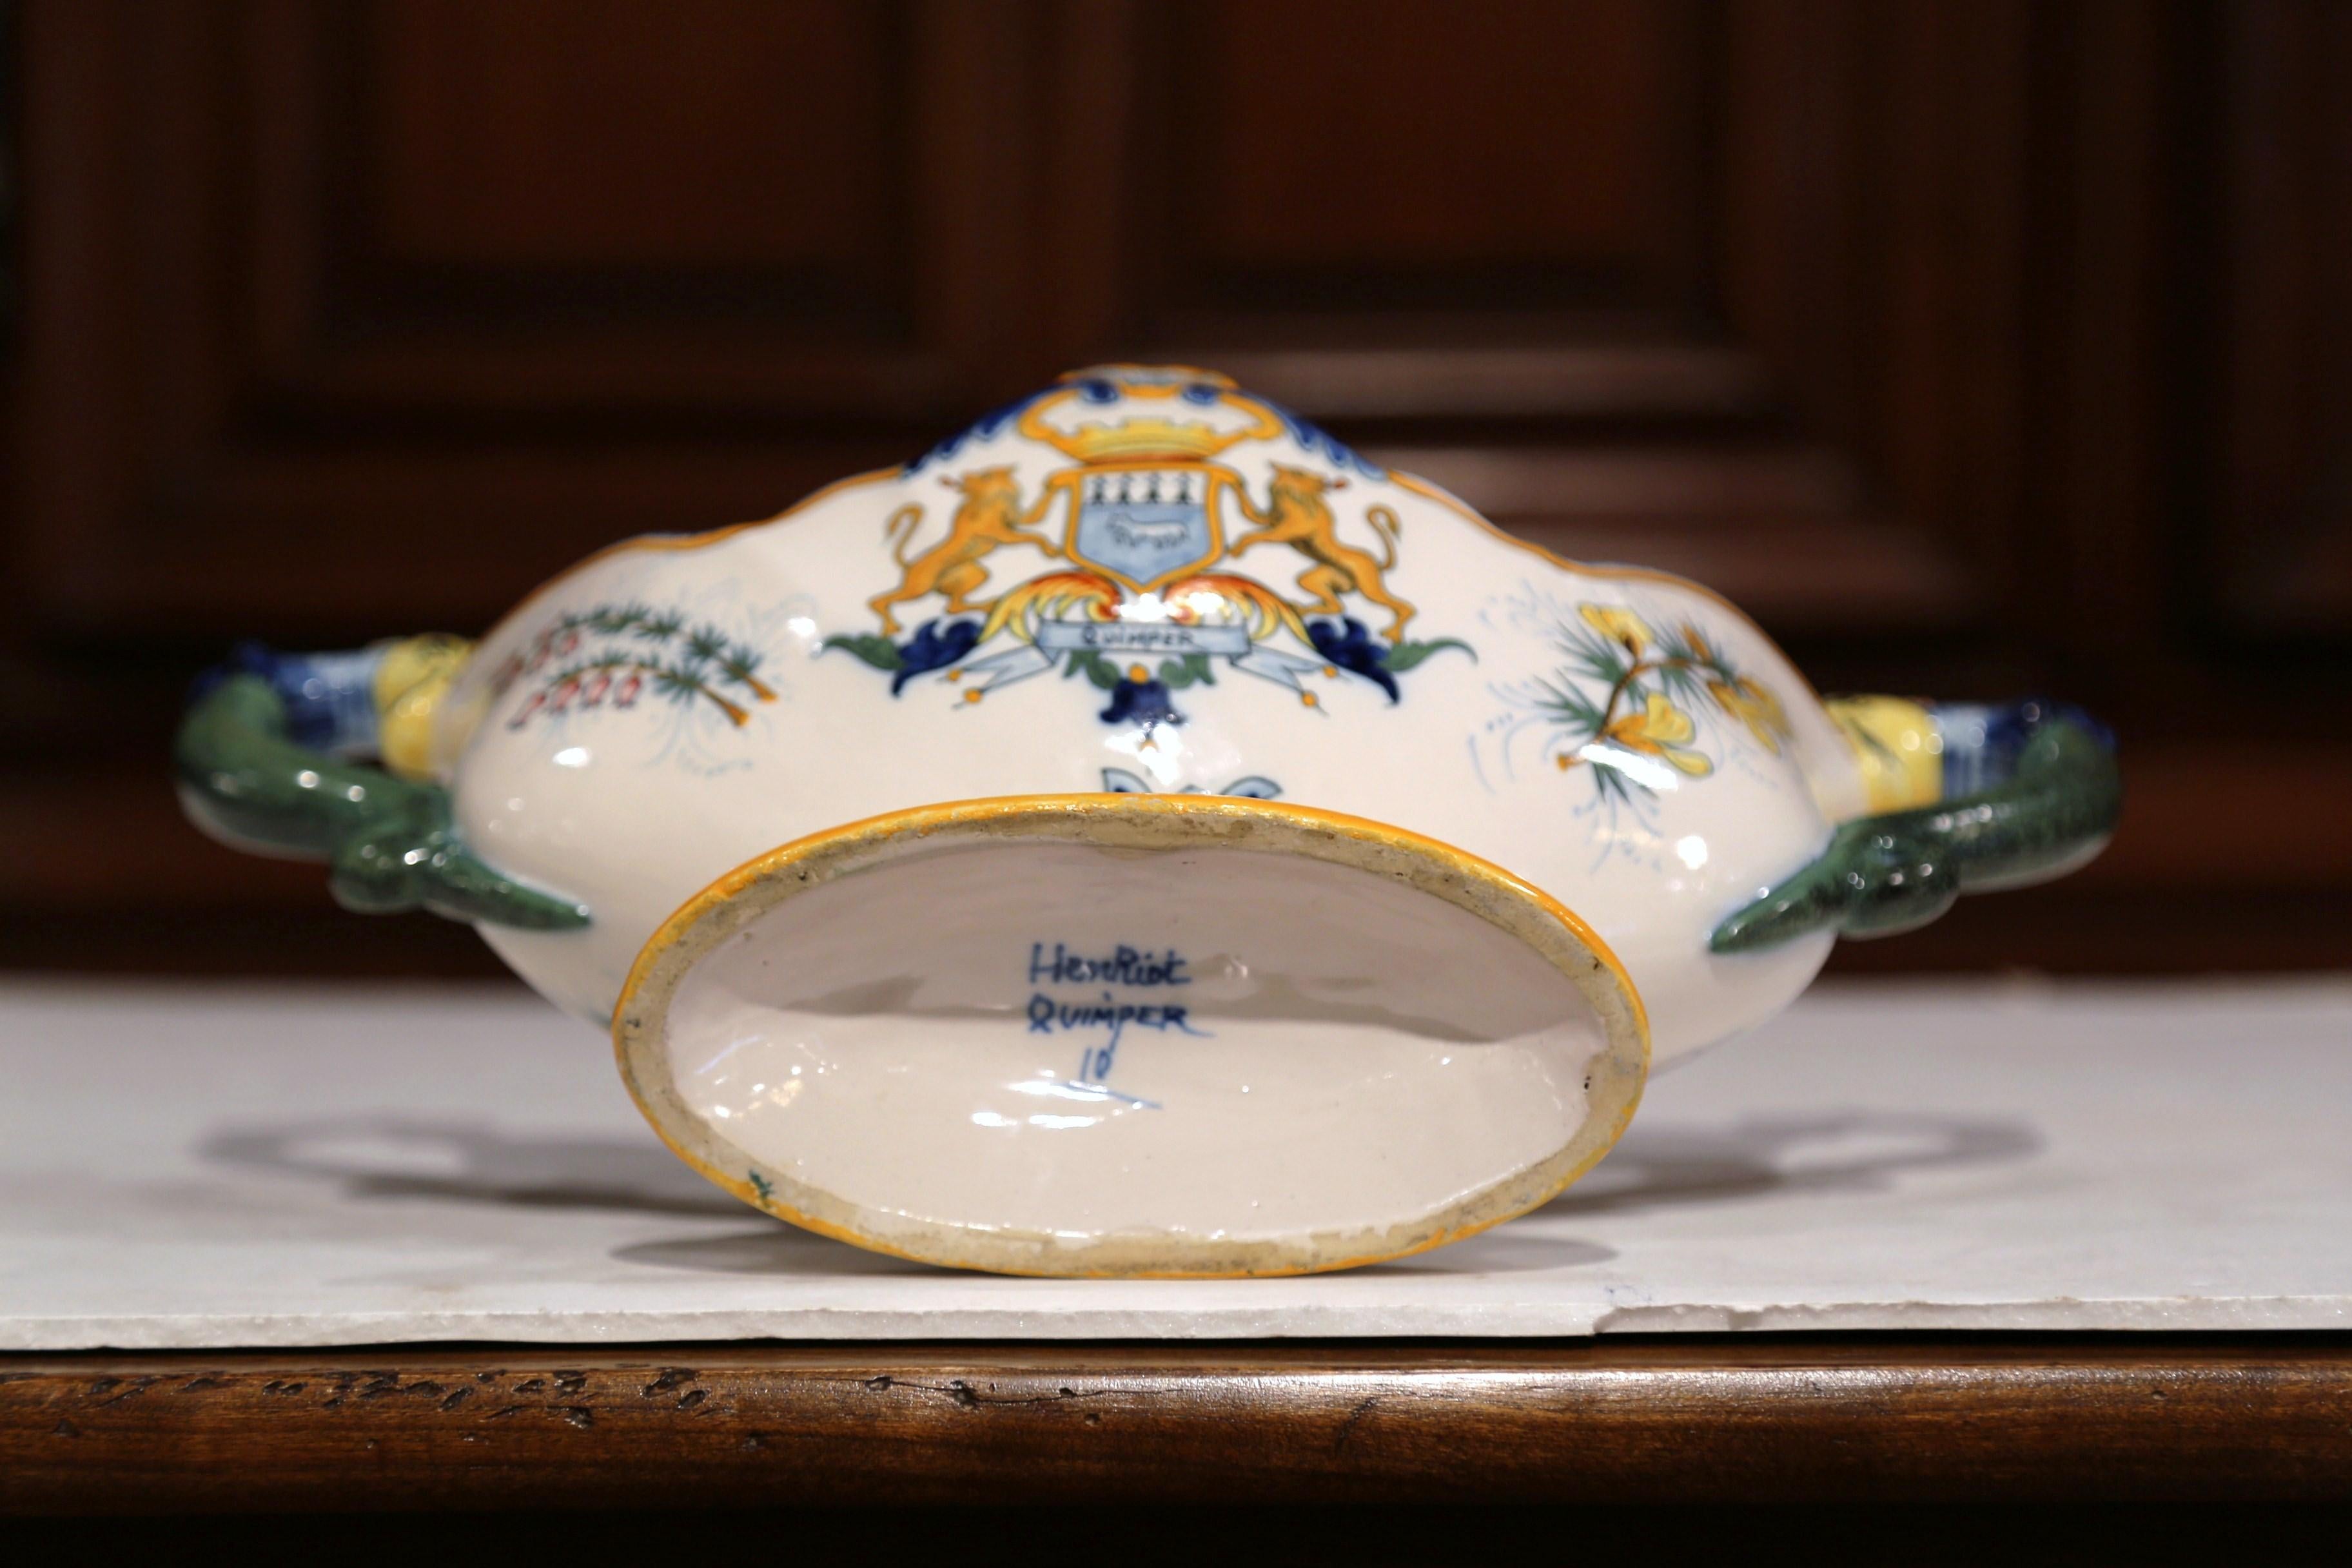 19th Century French Hand Painted Faience Oval Jardinière Signed Henriot Quimper 6